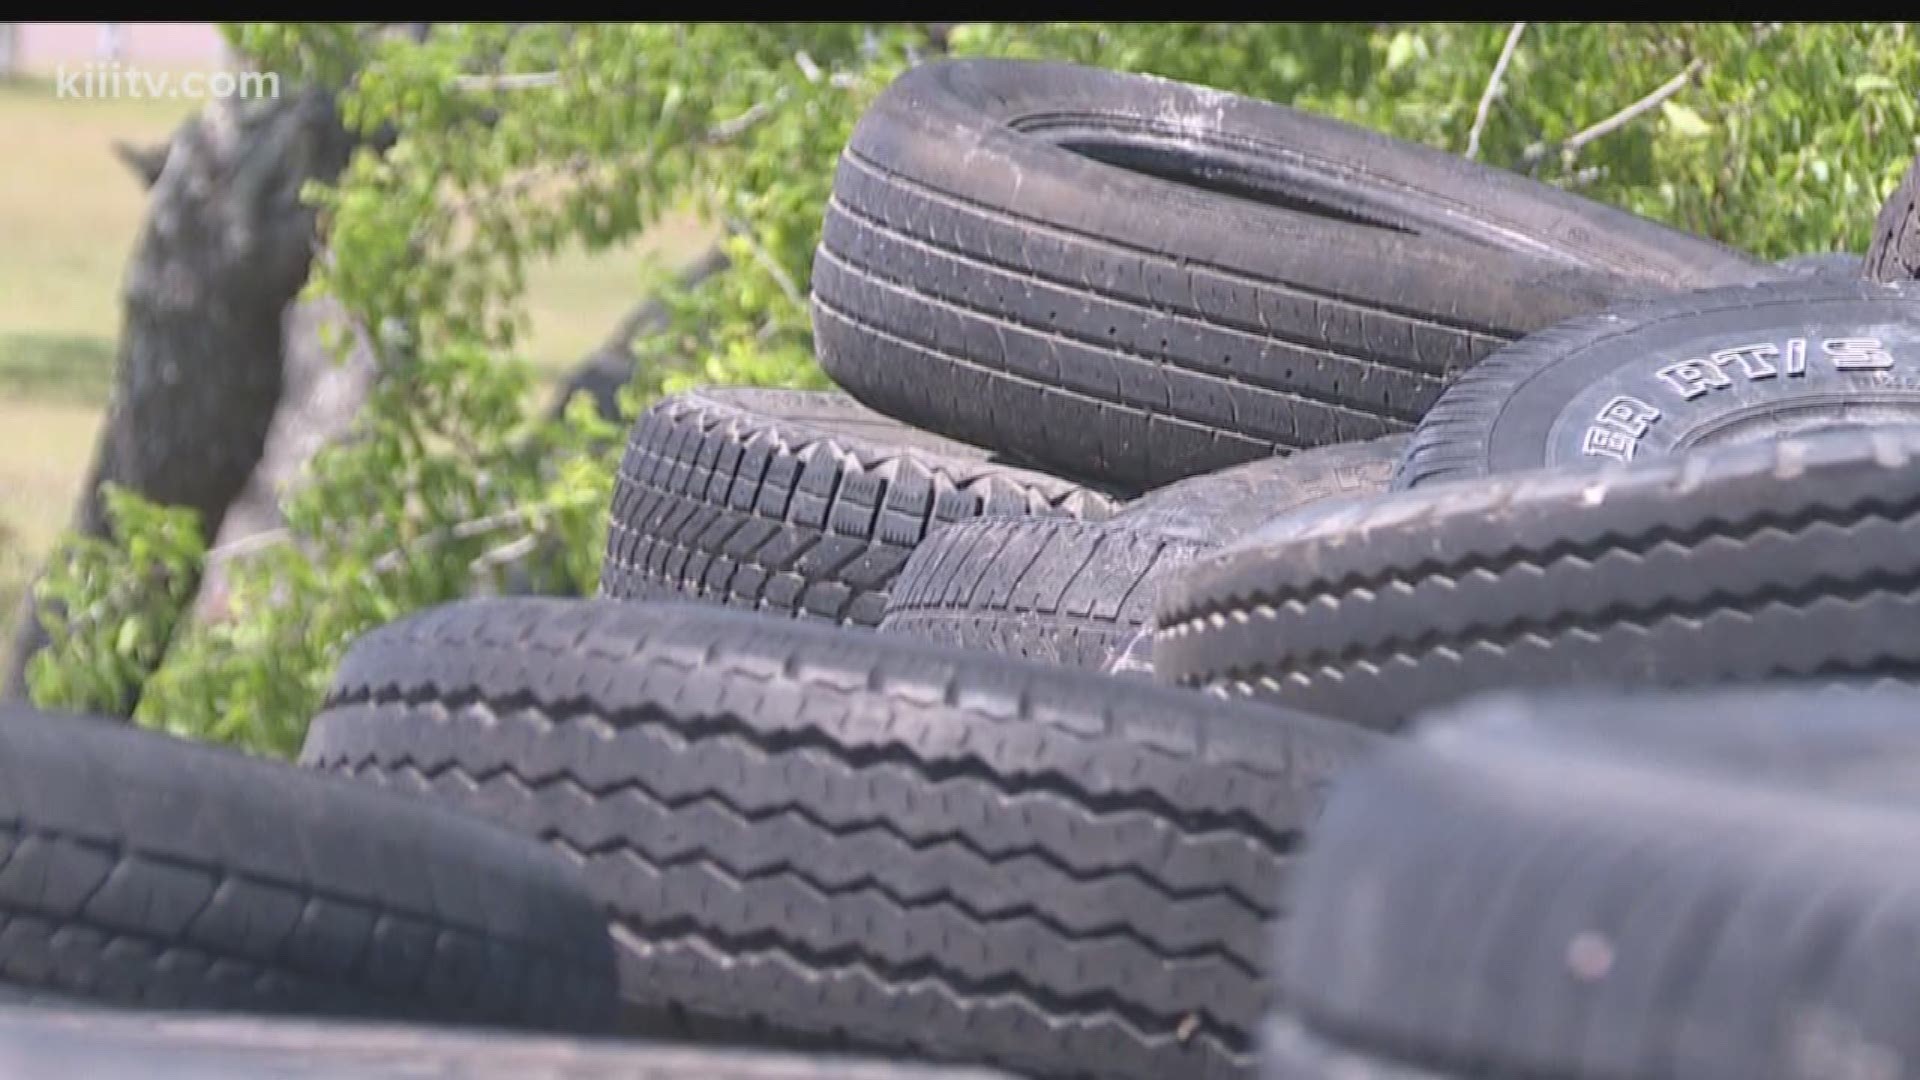 Bridgestone will pick up the tires and will be recycling them for other projects like playgrounds.